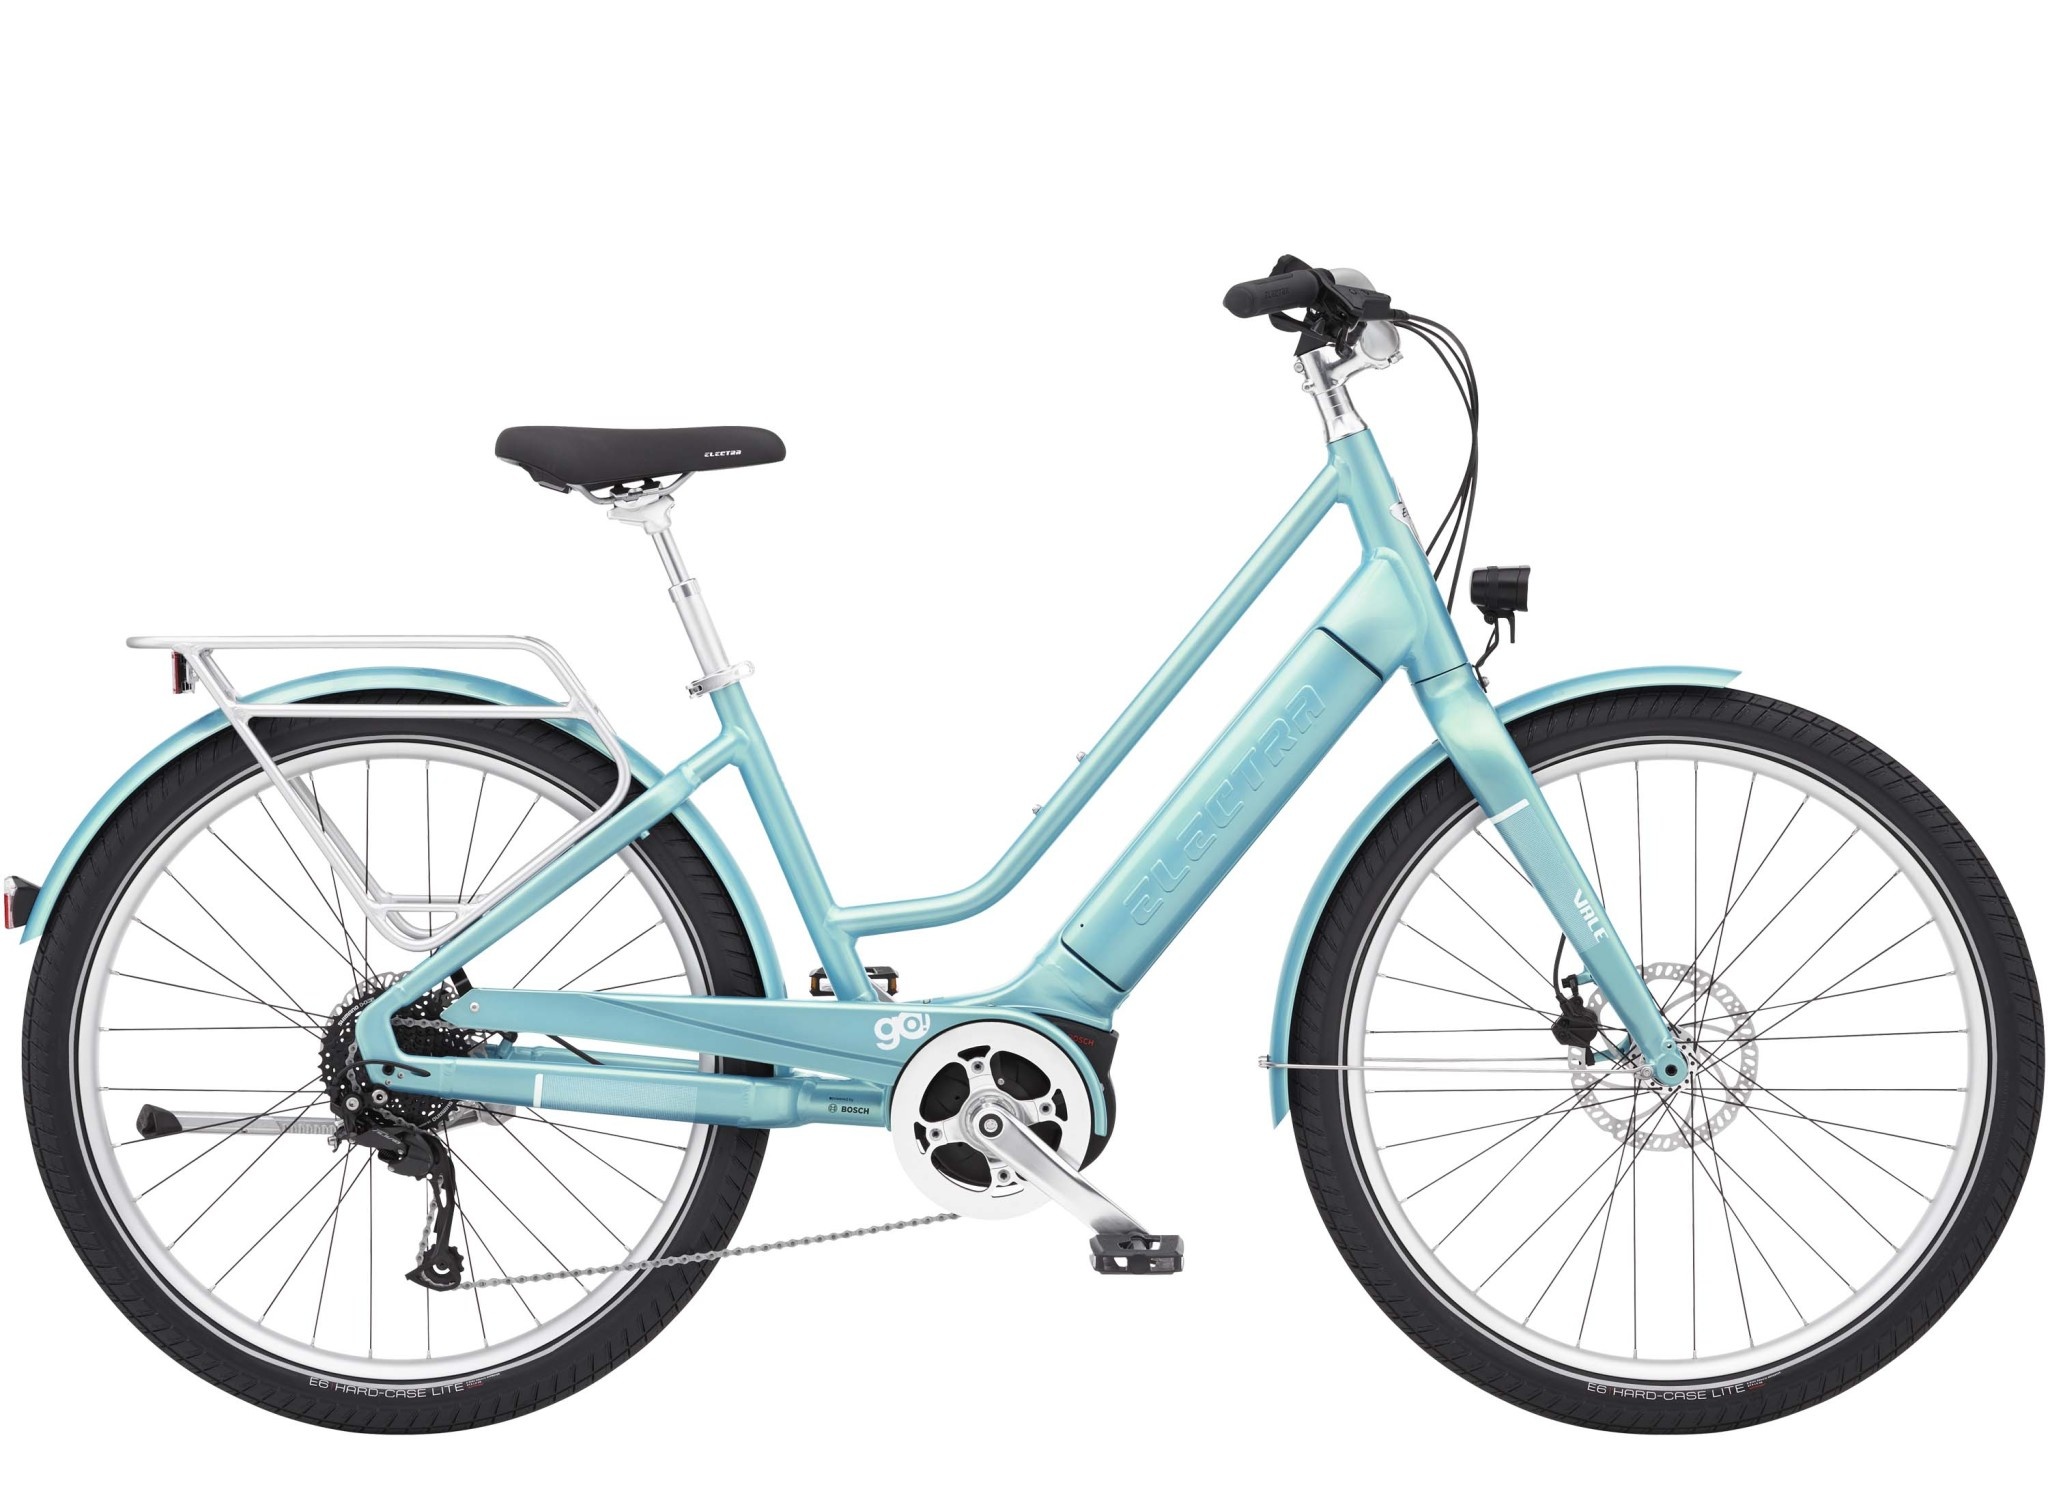 Wennen aan Encommium Detector Electra Vale Go! 9D EQ S Step-Thru - Hermosa Cyclery